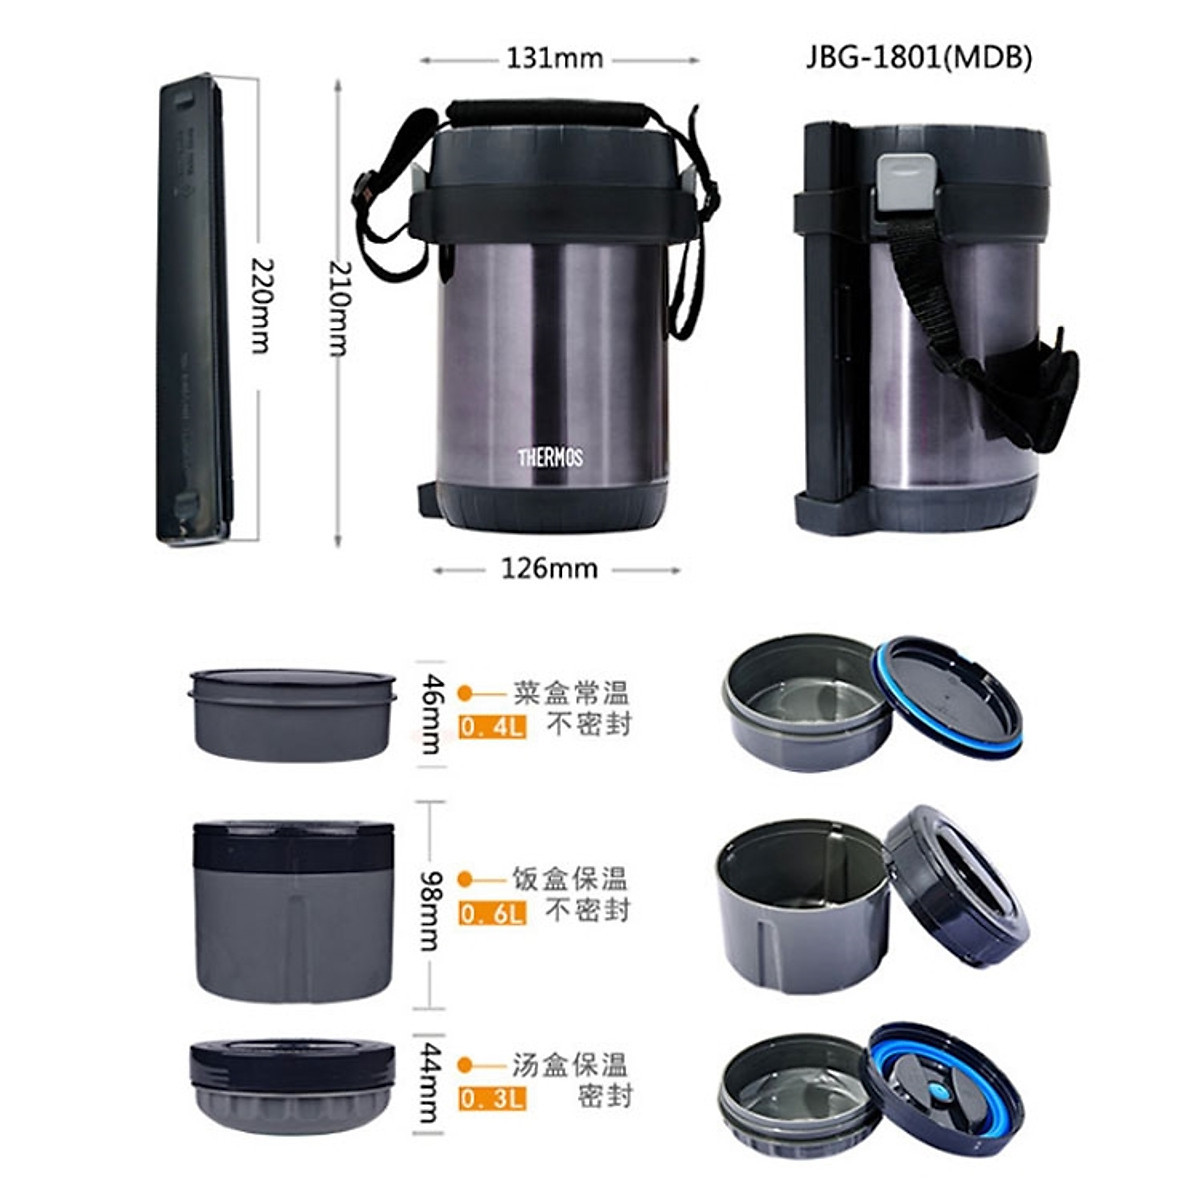 Hộp cơm giữ nhiệt 3 ngăn size lớn Thermos Stainless Steel JBG-2000